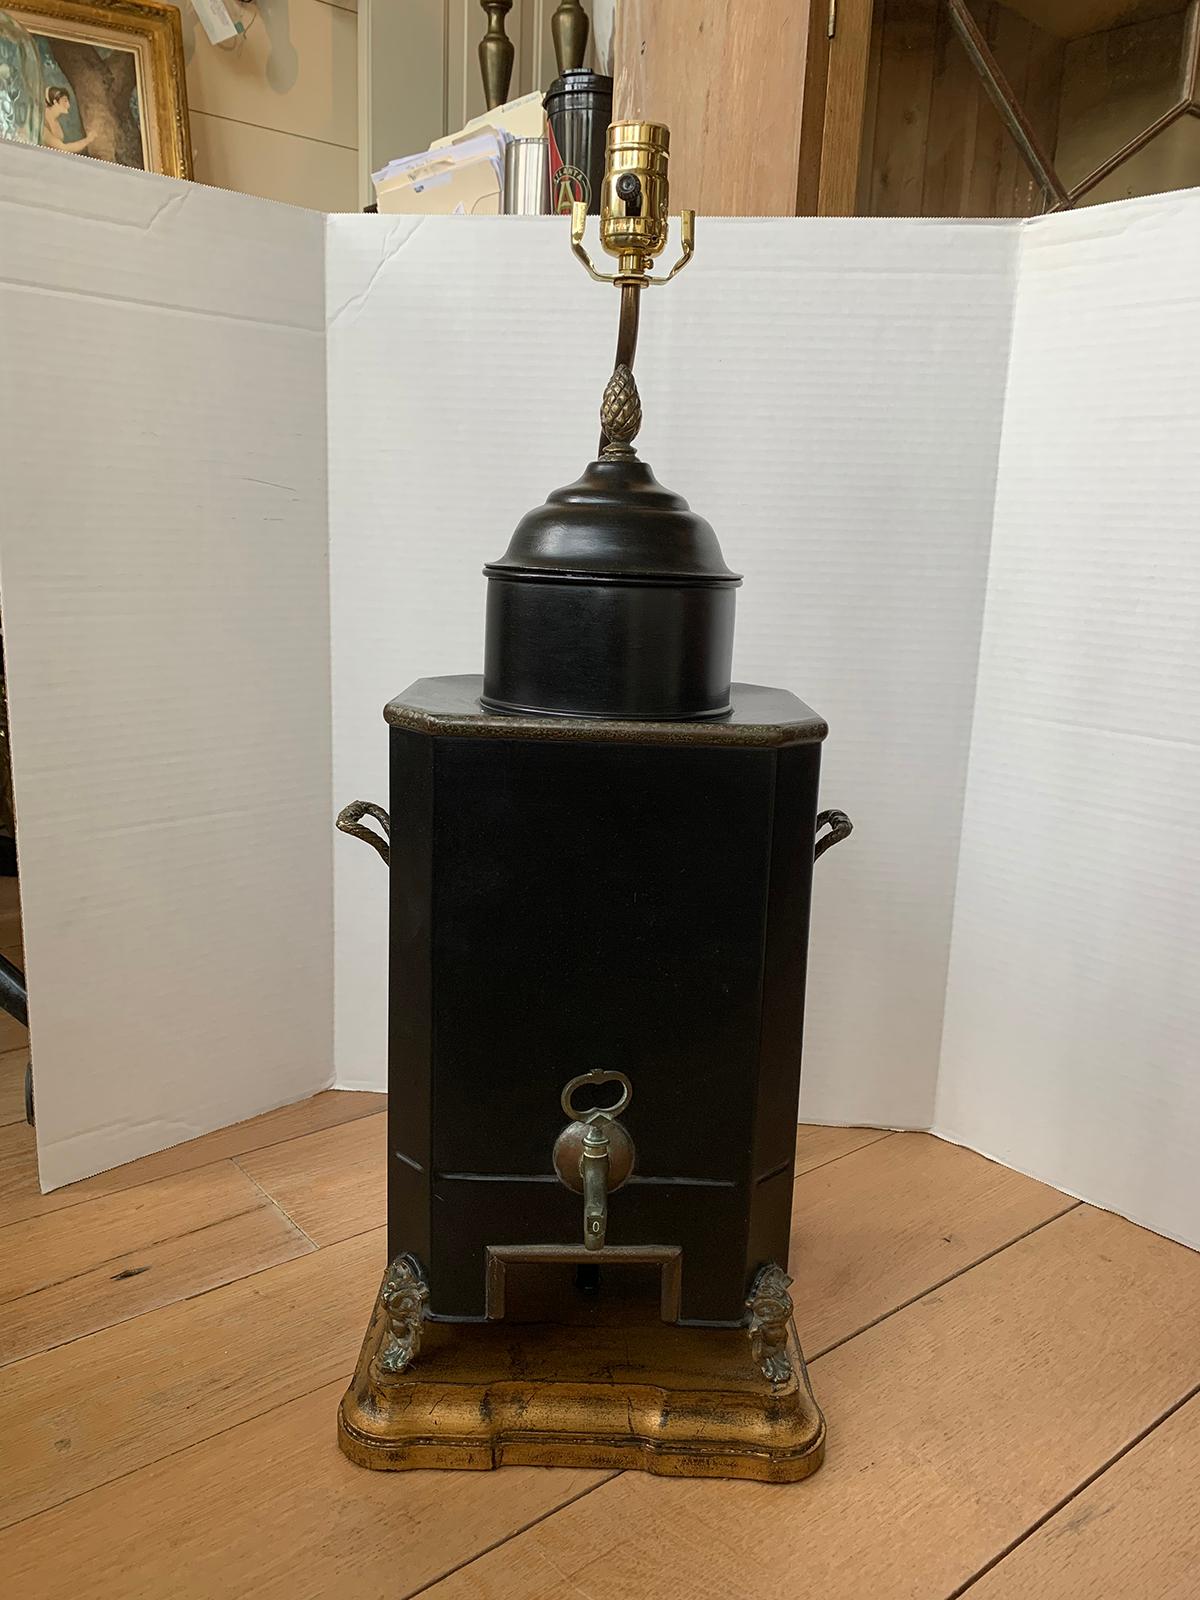 19th-20th century Regency style hot water urn as lamp
New wiring.